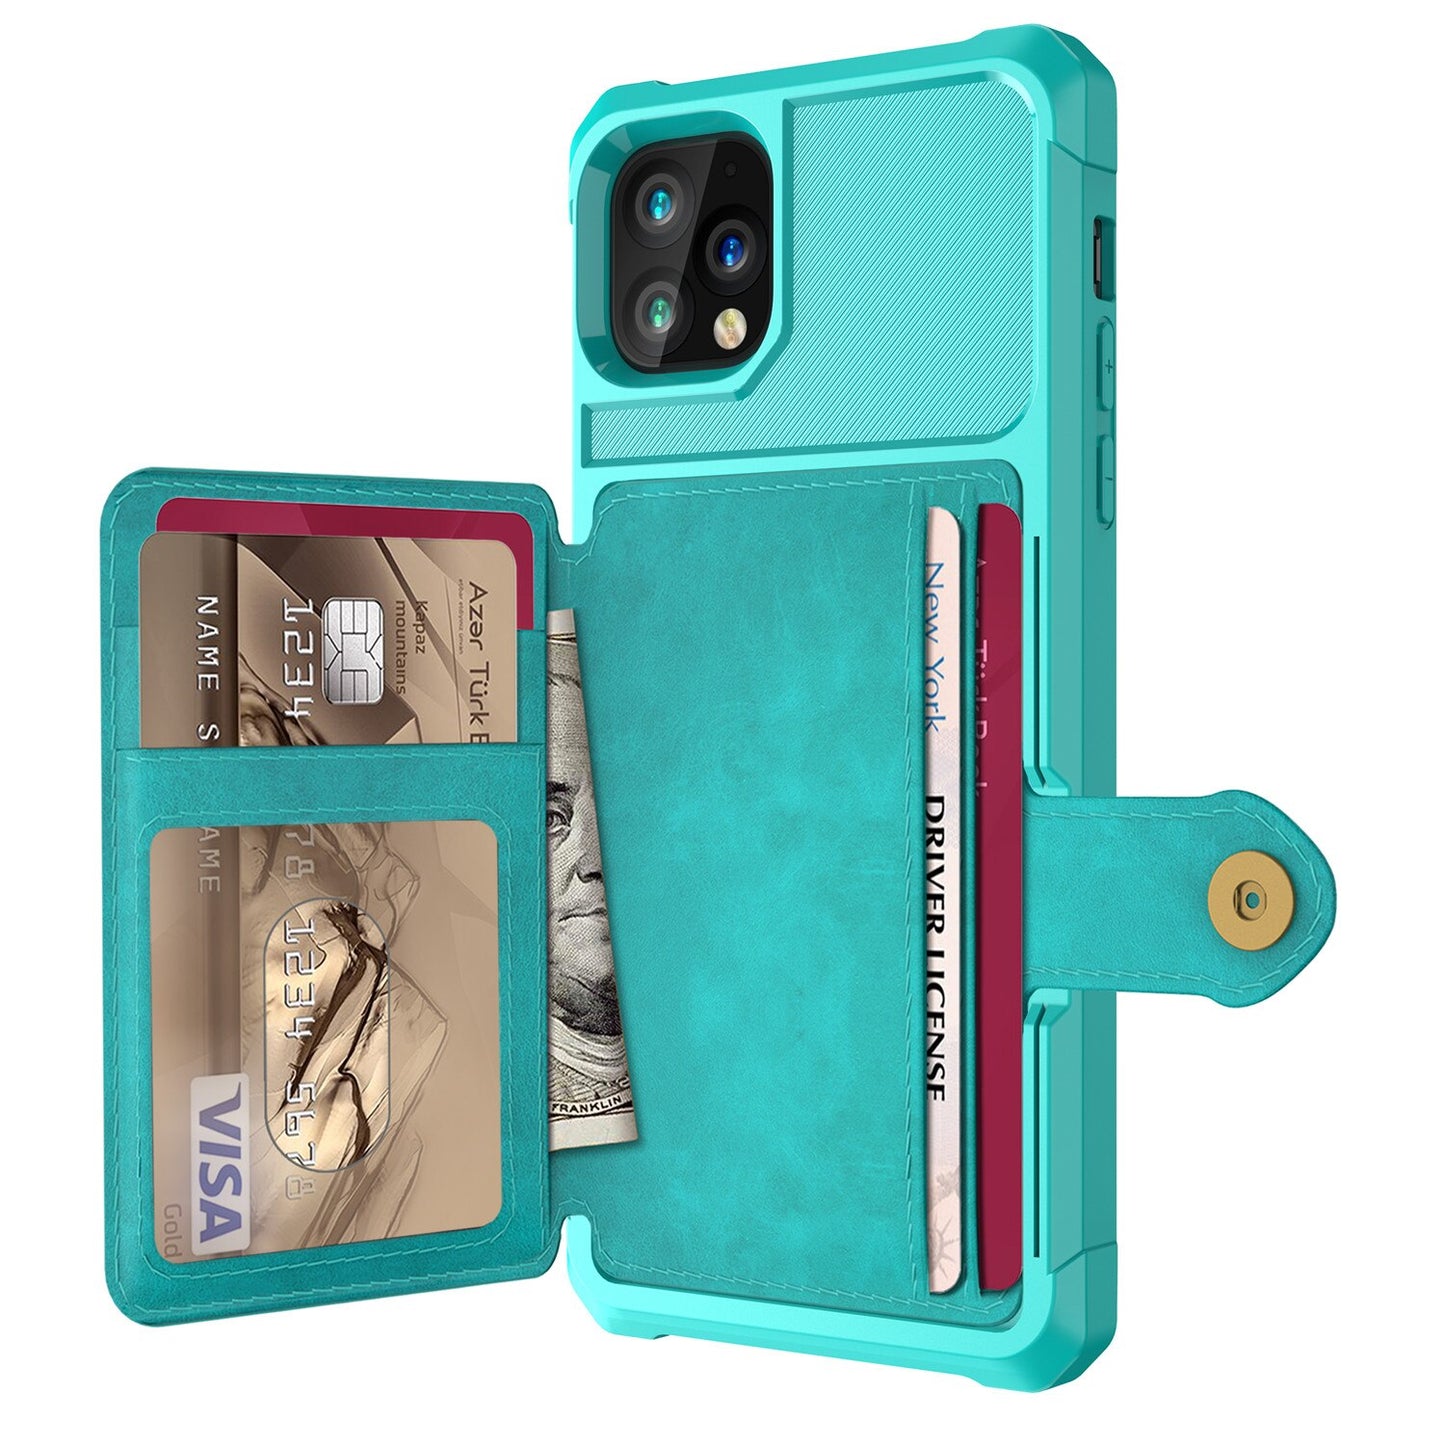 Luxury PU Leather Wallet Case for iPhone Latest iPhone Models